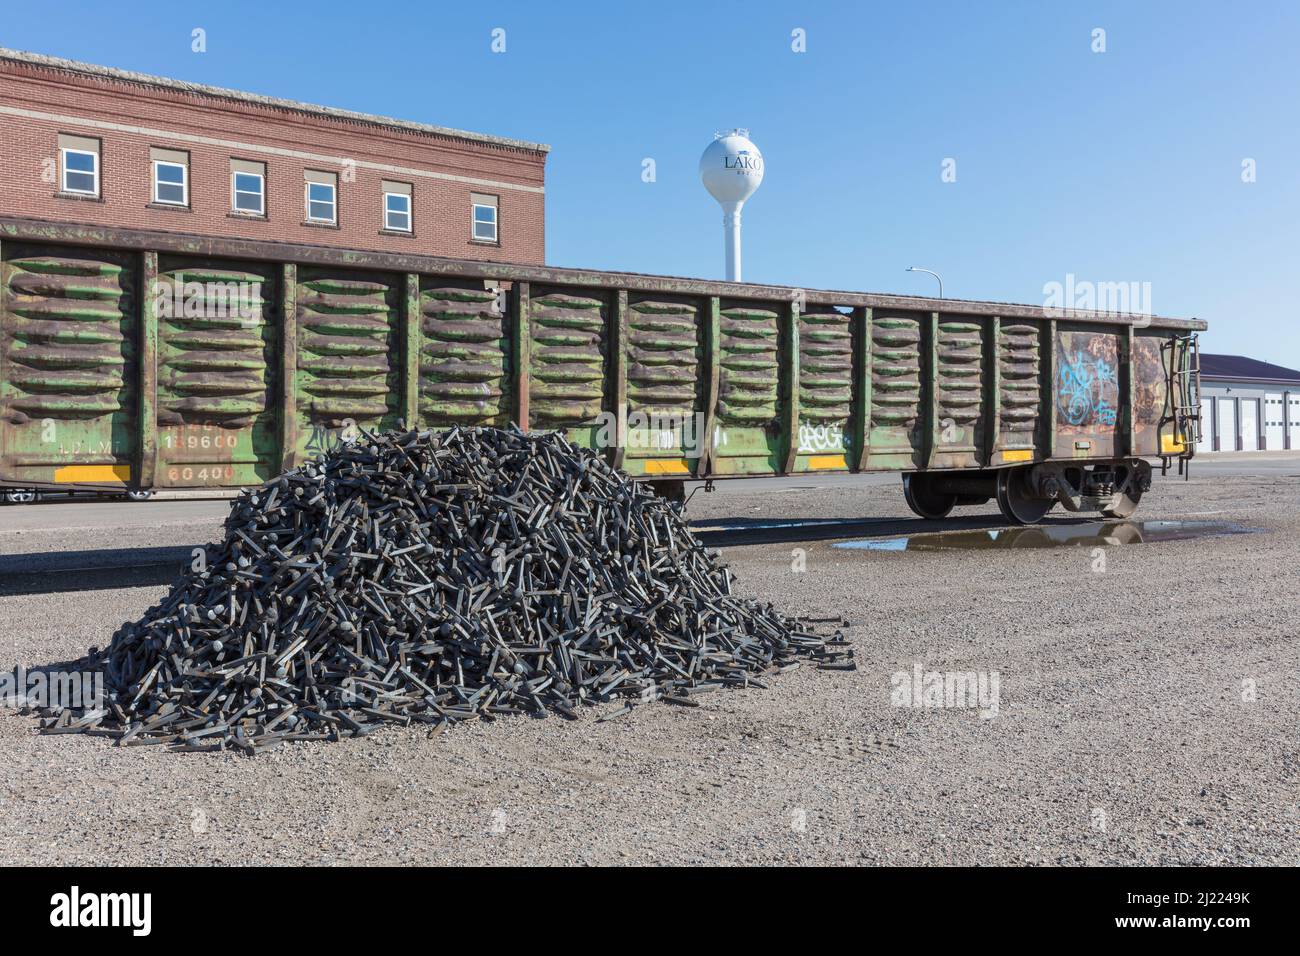 Railroad depot, a boxcar train wagon and a heap of discarded metal pins, track spikes. Stock Photo